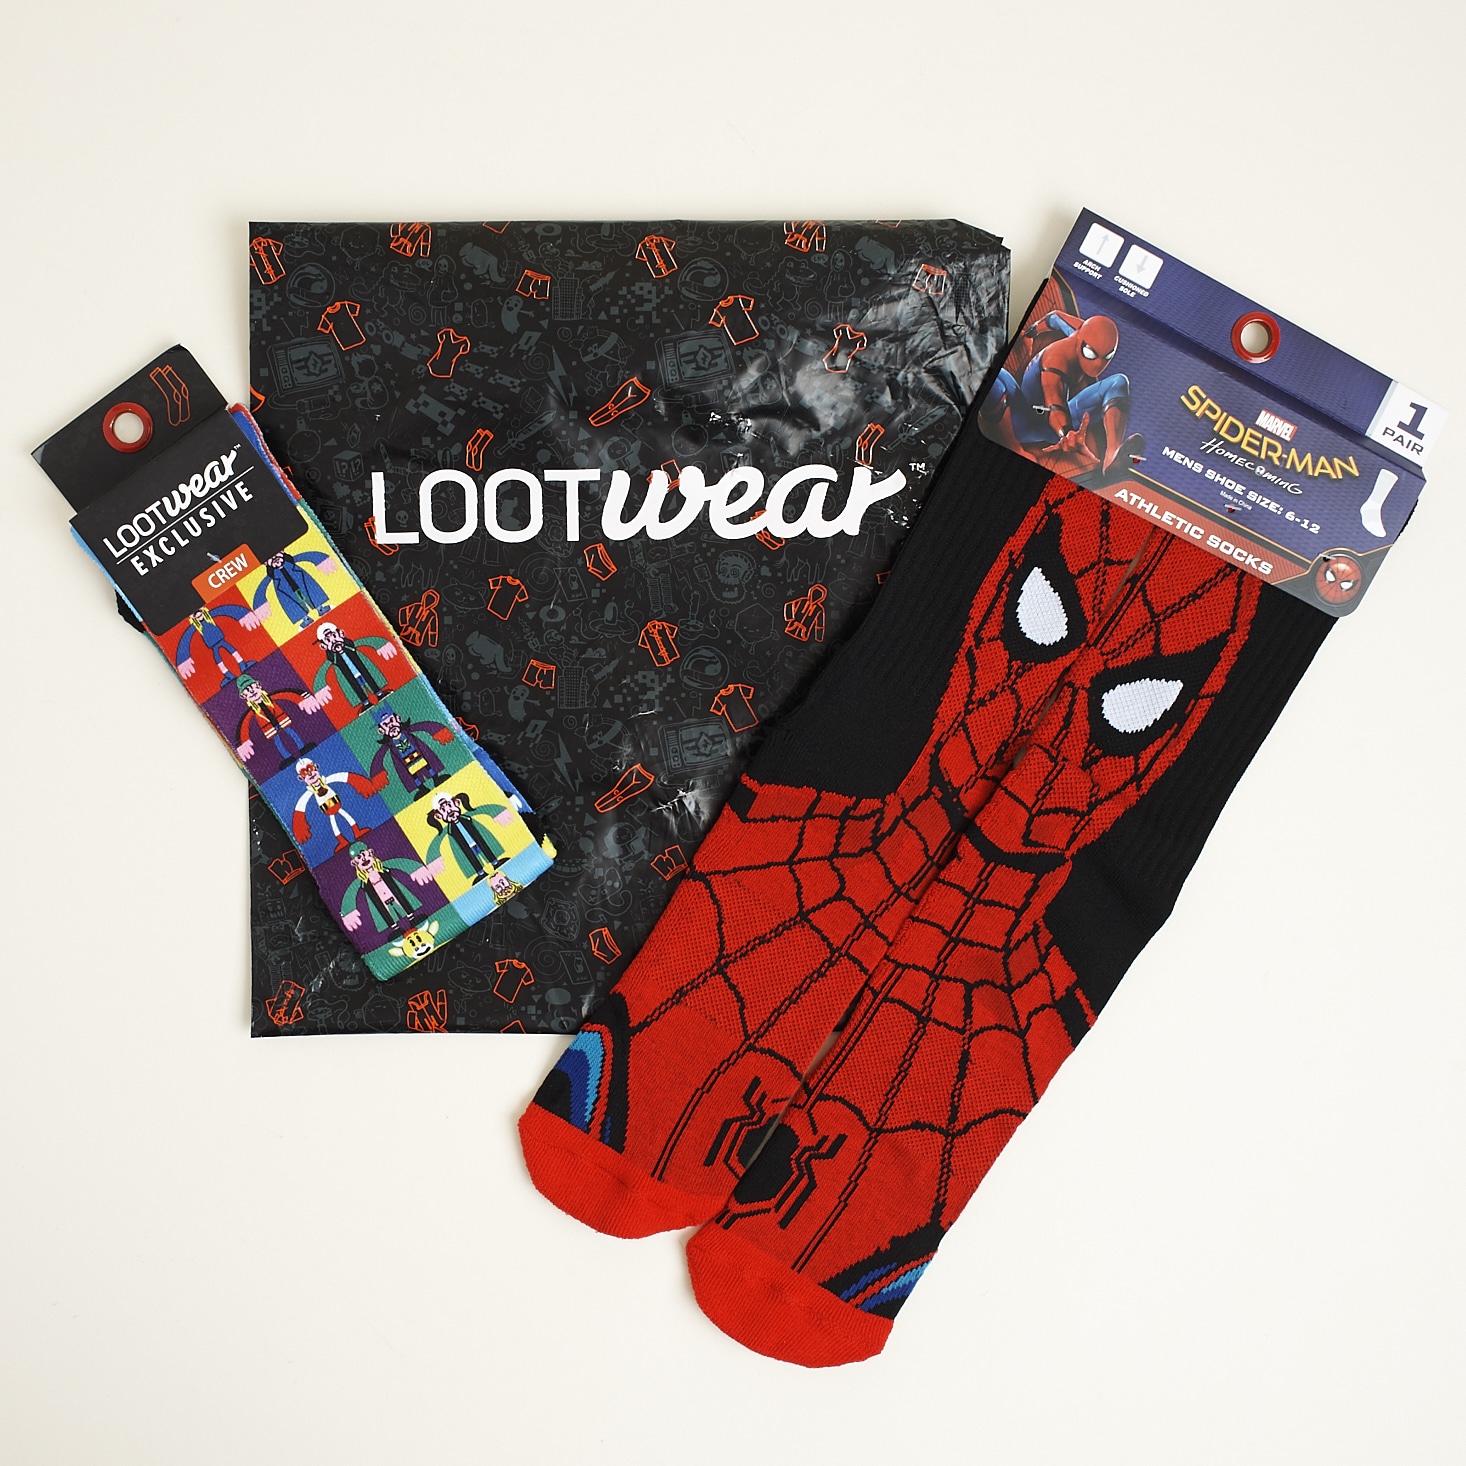 Loot Socks Subscription by Loot Crate Review + Coupon – June 2017